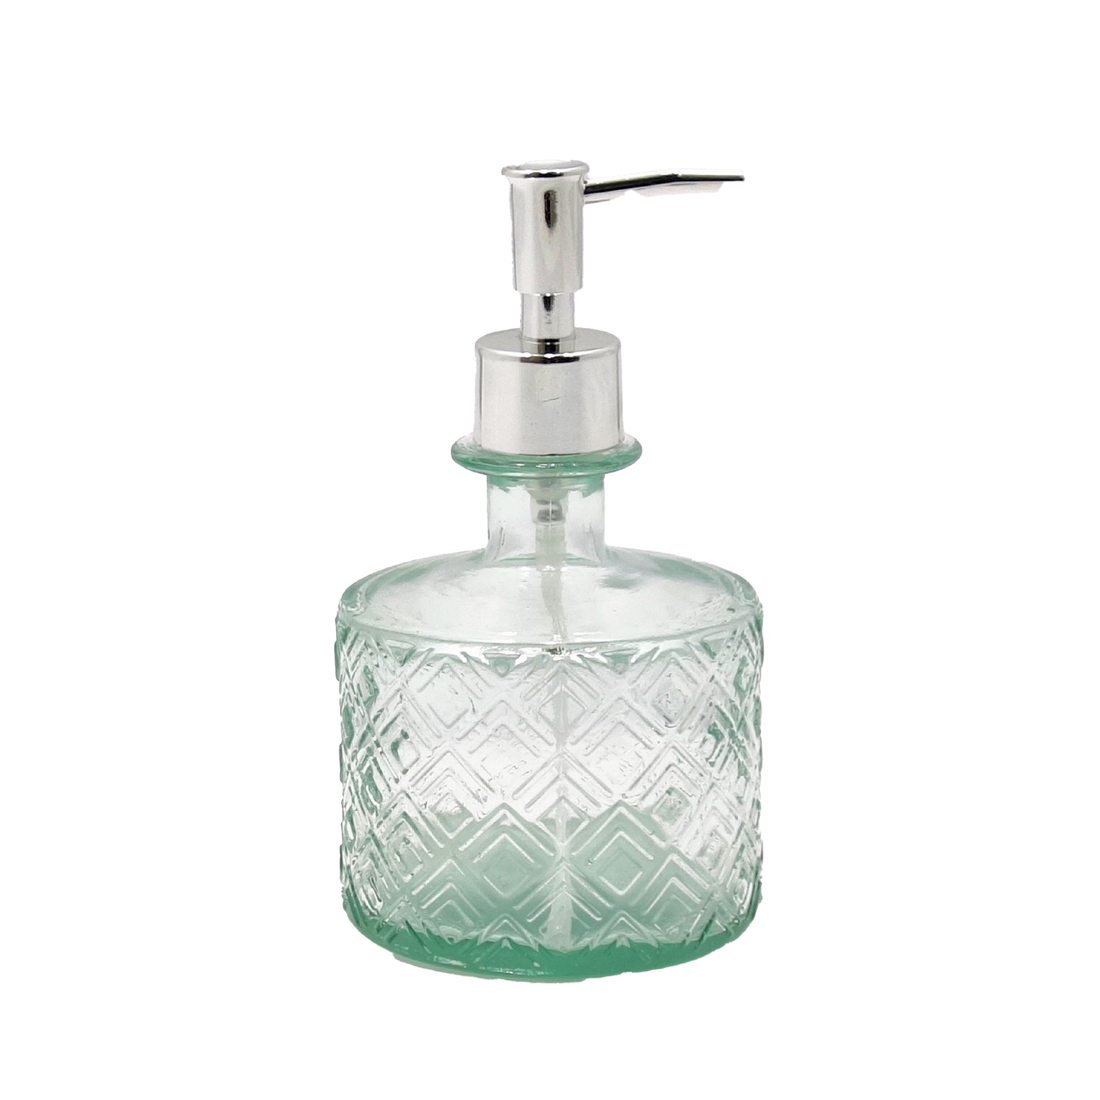 NIHON RECYCLED GLASS SOAP DISPENSER | NATURAL RECYCLED